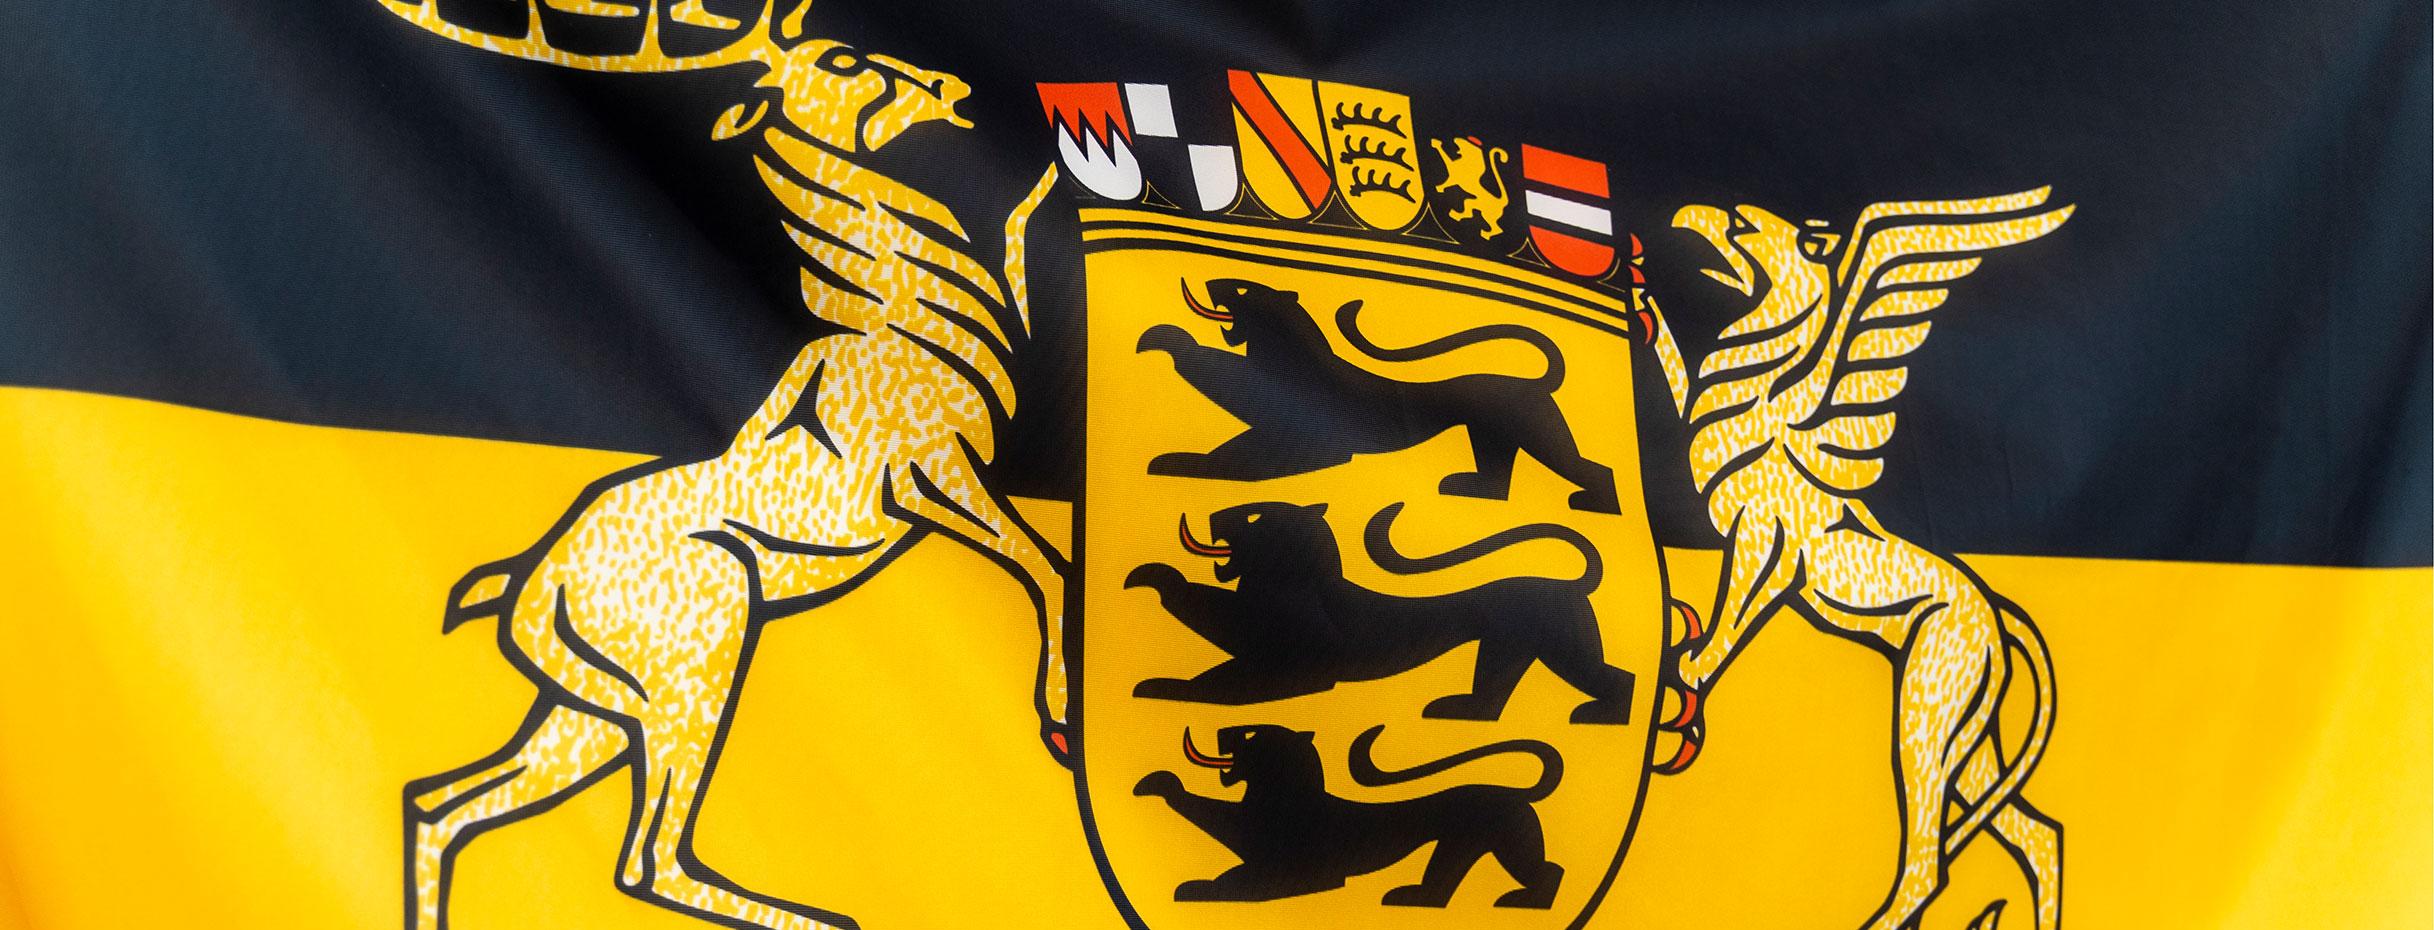 Detail from the State flag with the Baden-Württemberg coat of arms.